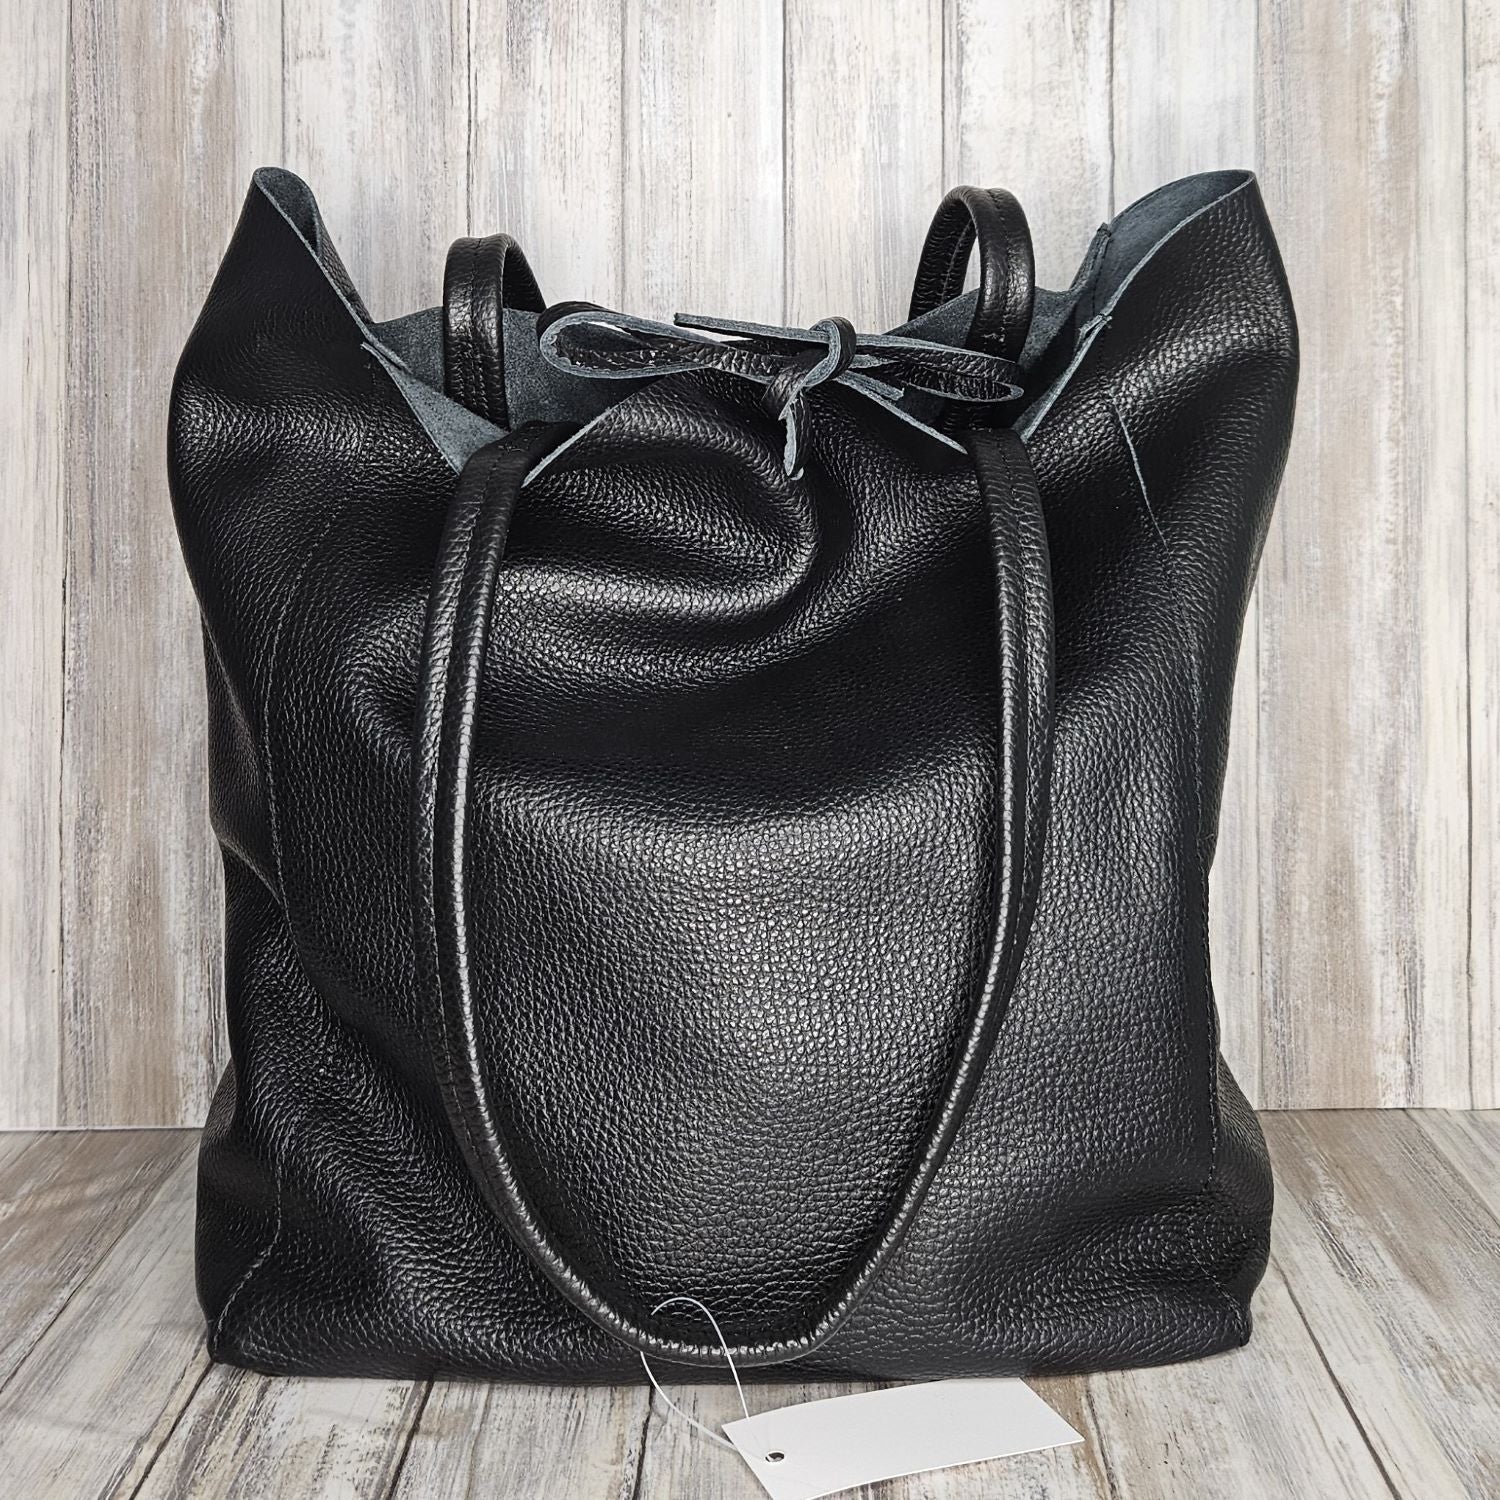 Experience luxury and organization with our pebbled leather Tote Bag! Made with soft Italian leather, this large tote features a convenient internal zip pocket and a stylish leather drawstring closure. Stay on-trend and chic with our fabulous black bag!